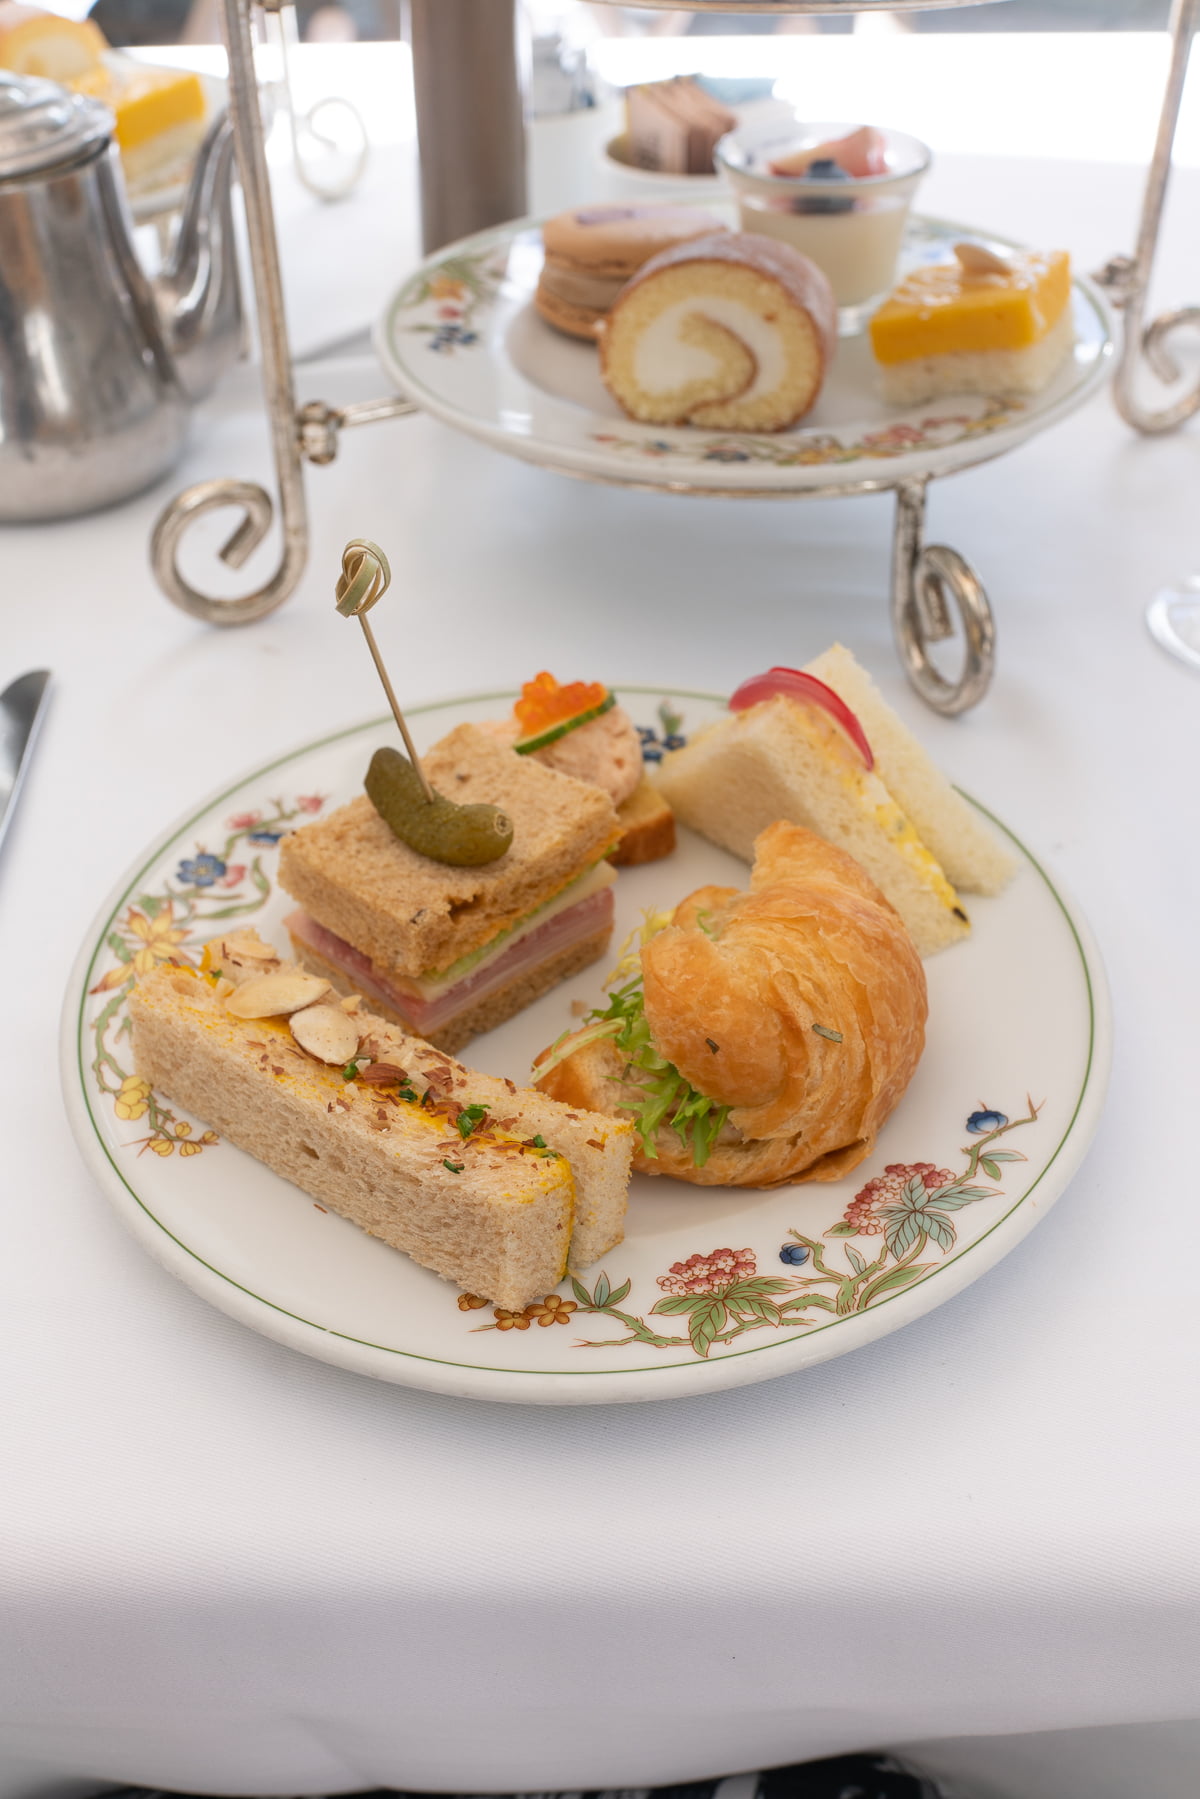 Savories and sandwiches served at afternoon tea at Moana Surfrider.